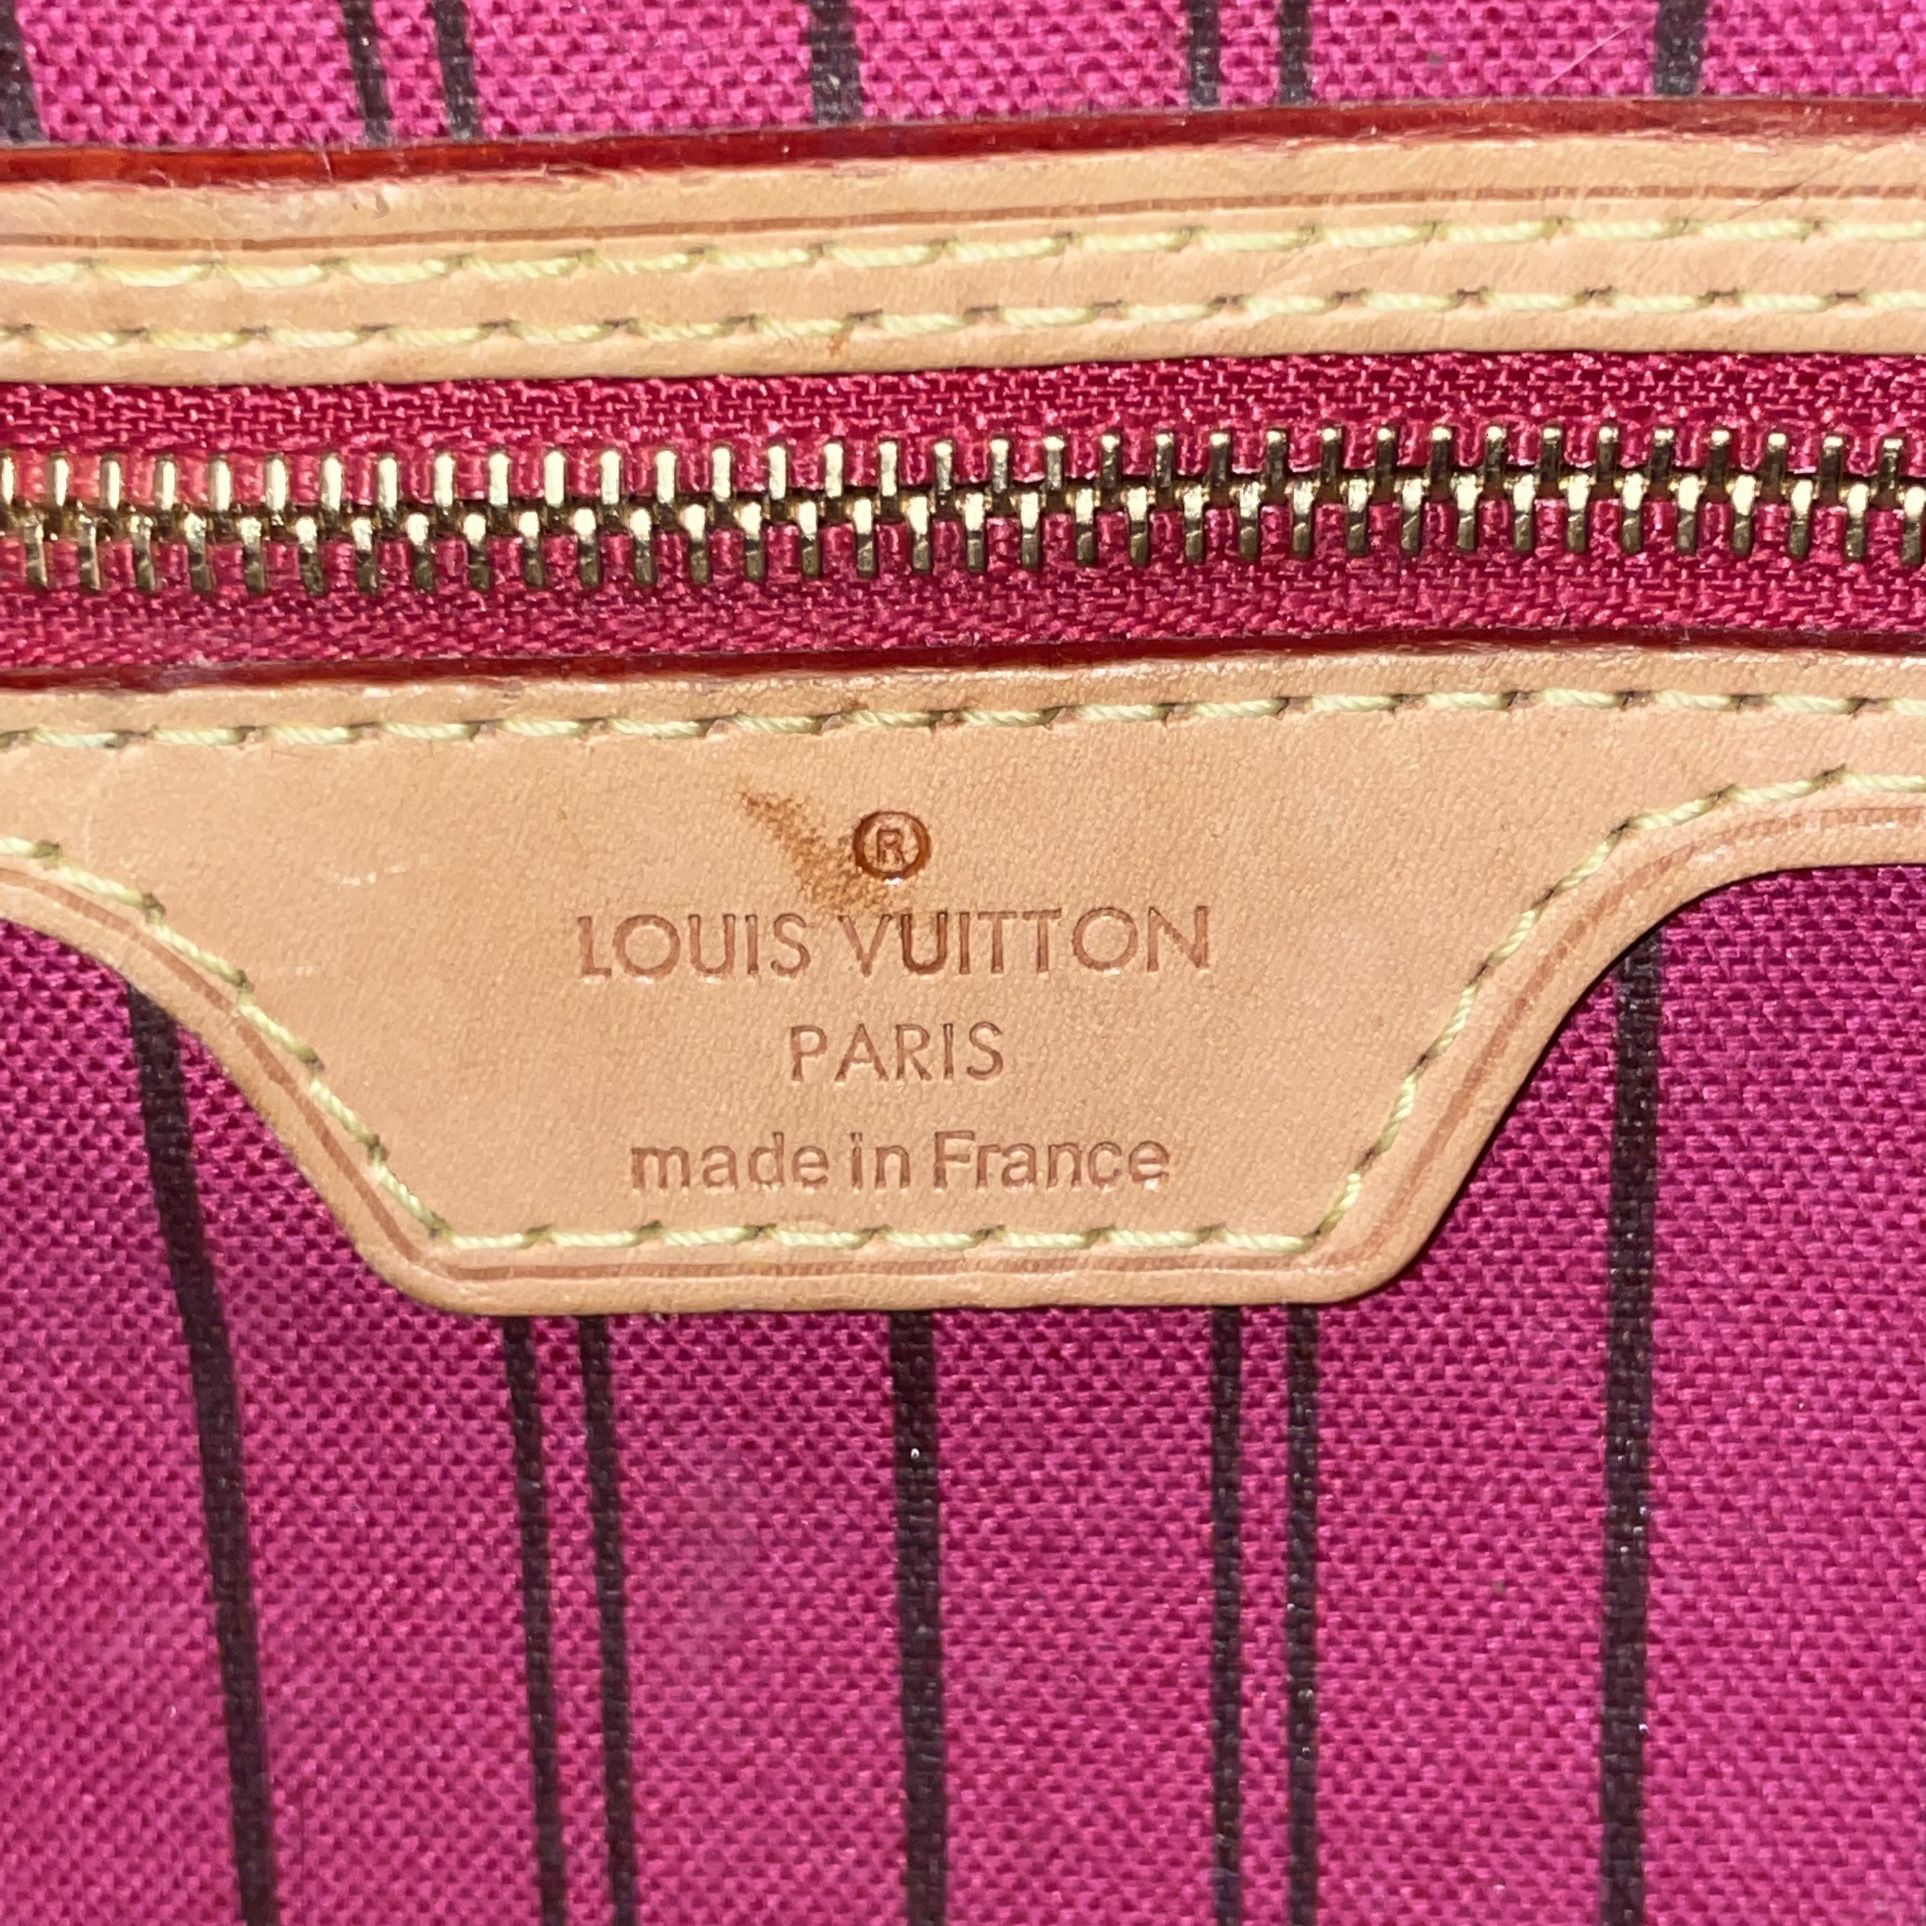 LOUIS VUITTON NEVERFULL for Sale in Bowie, MD - OfferUp